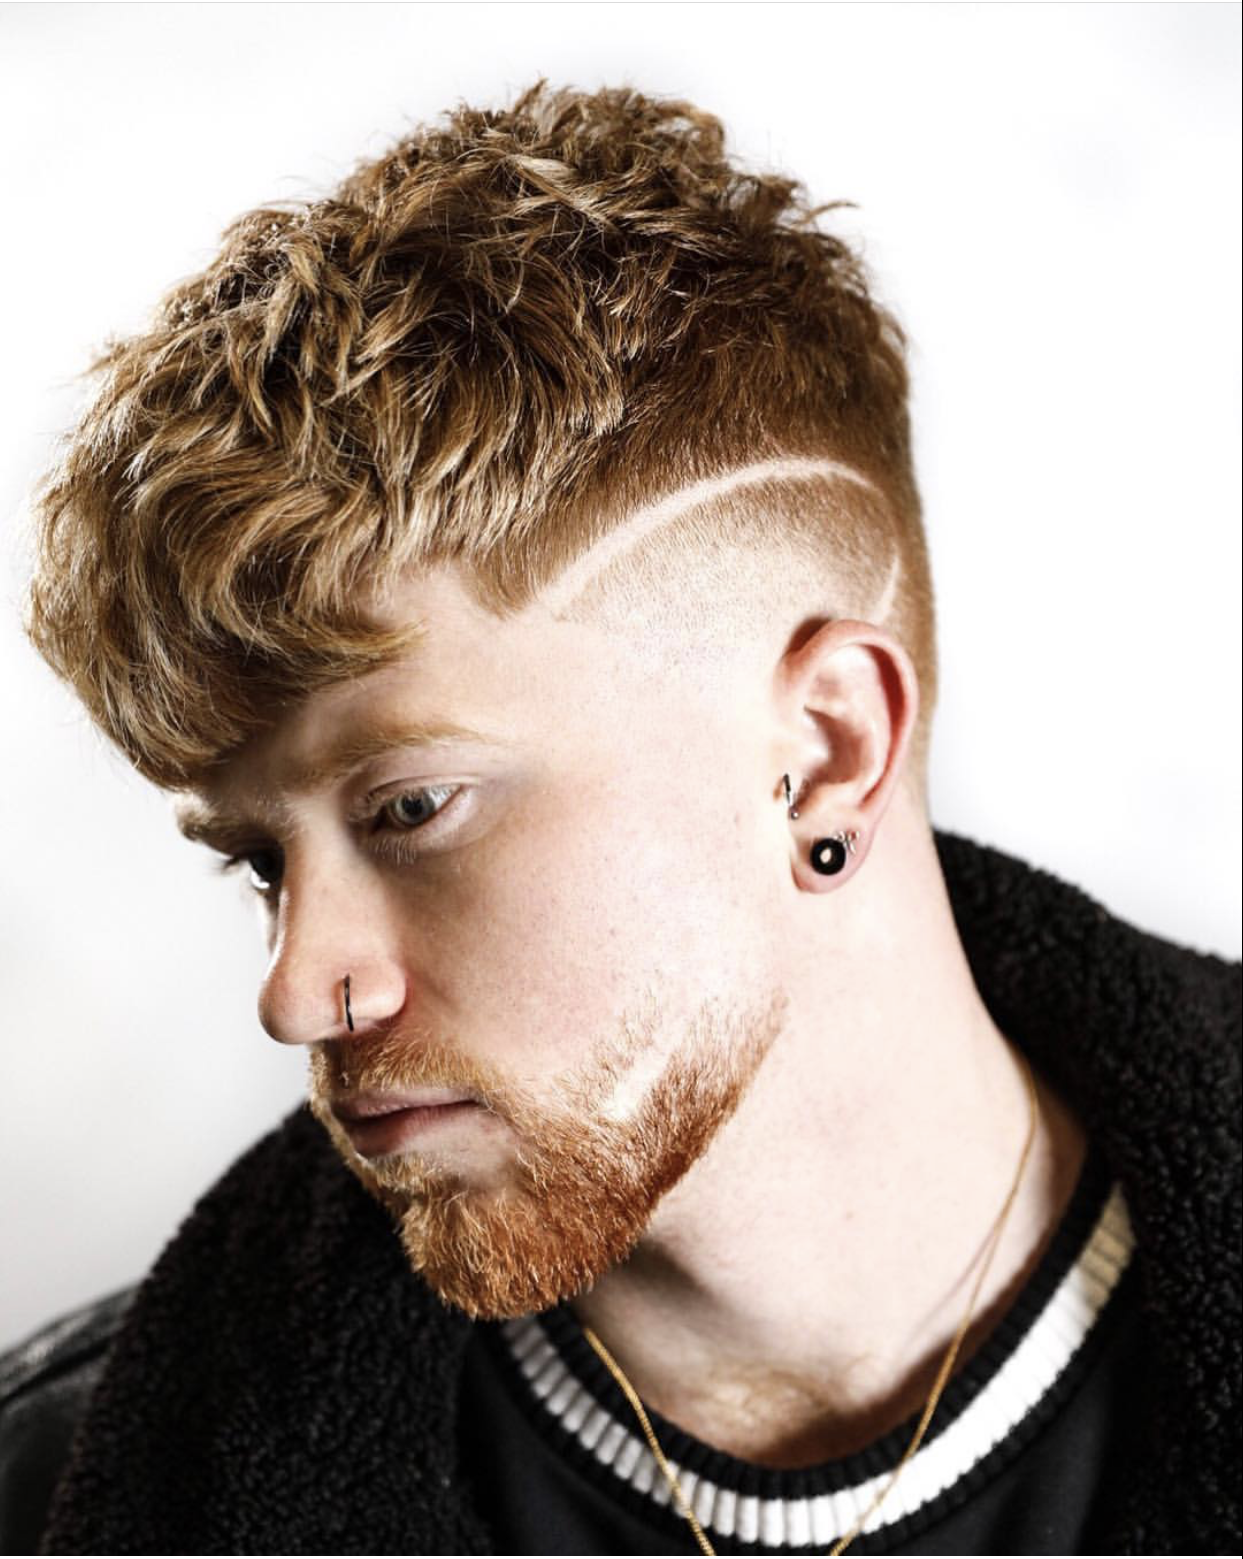 17 Cool Haircuts For Men 2019 | Long Top, Shaved Sides | Hairstyleonpoint.com